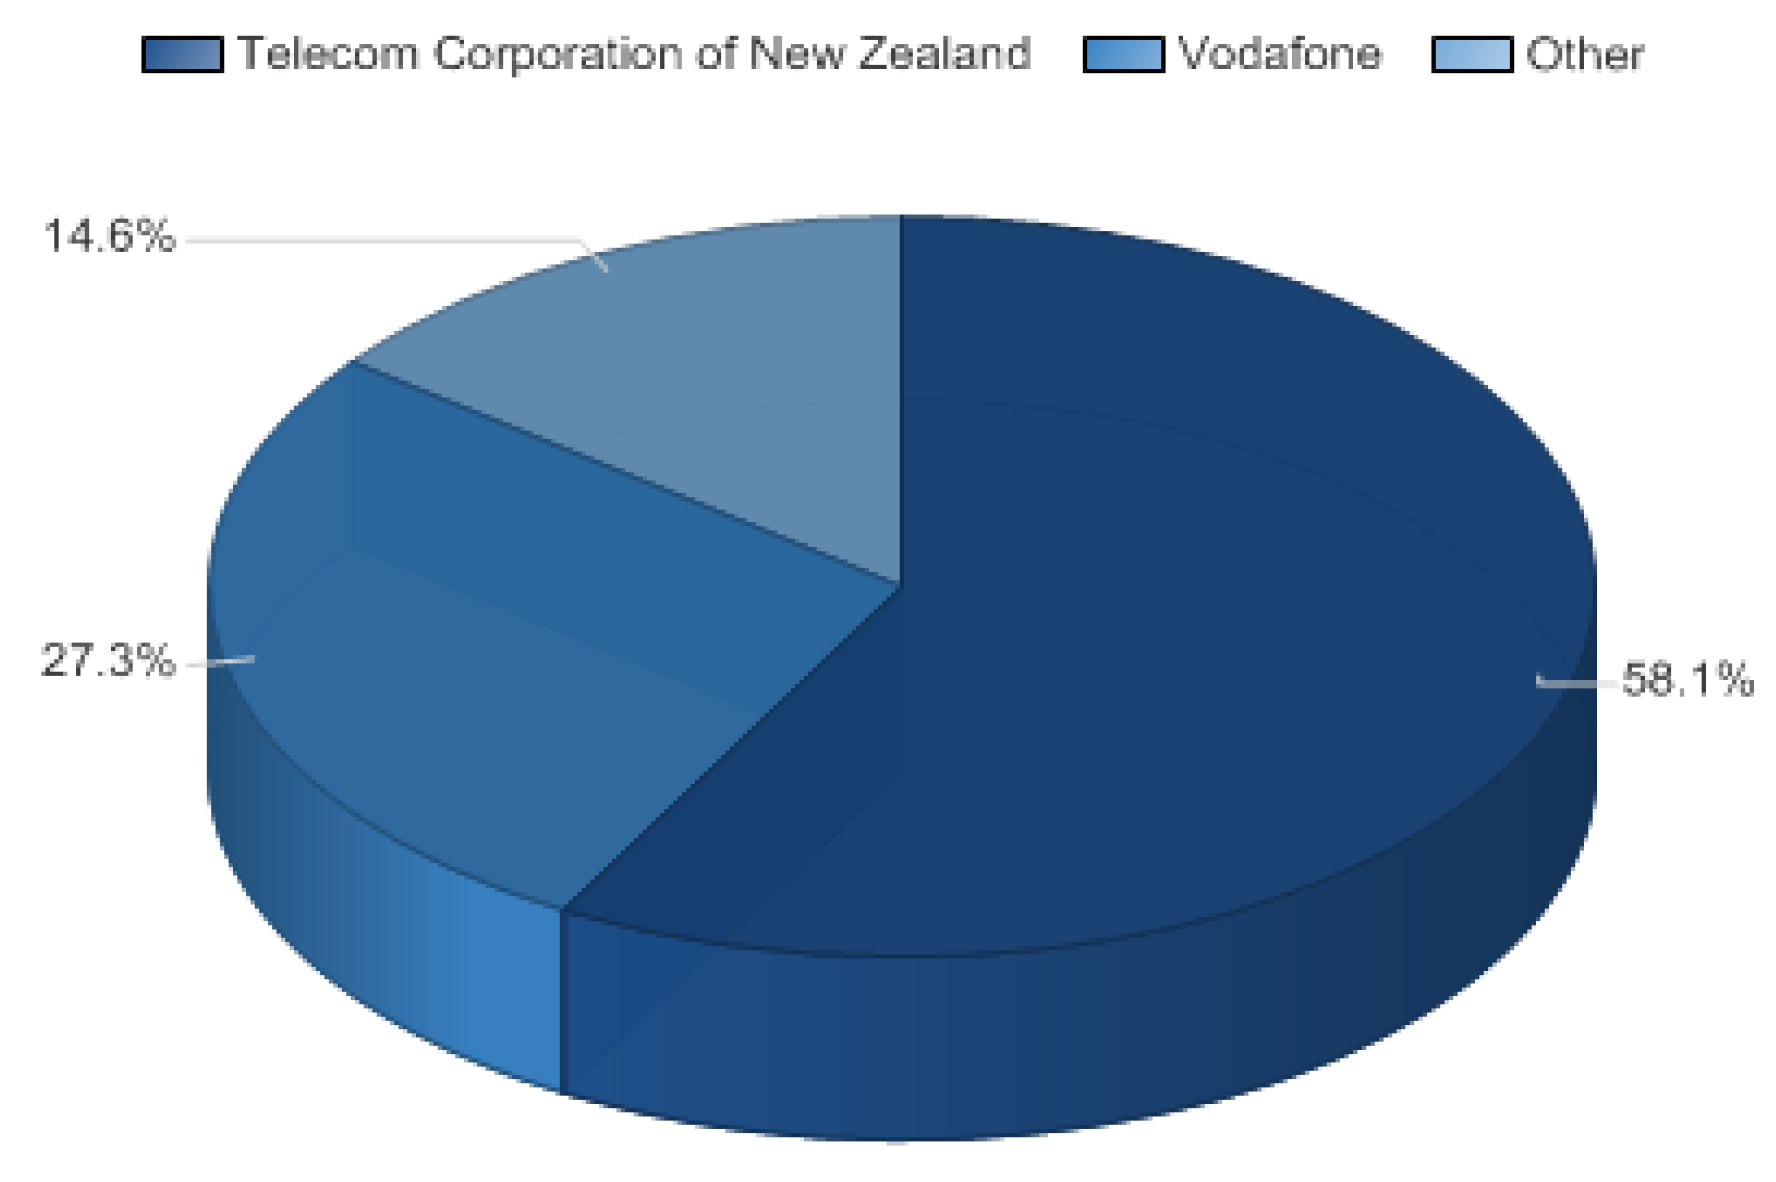  Fixed-line telecommunications market share in NZ